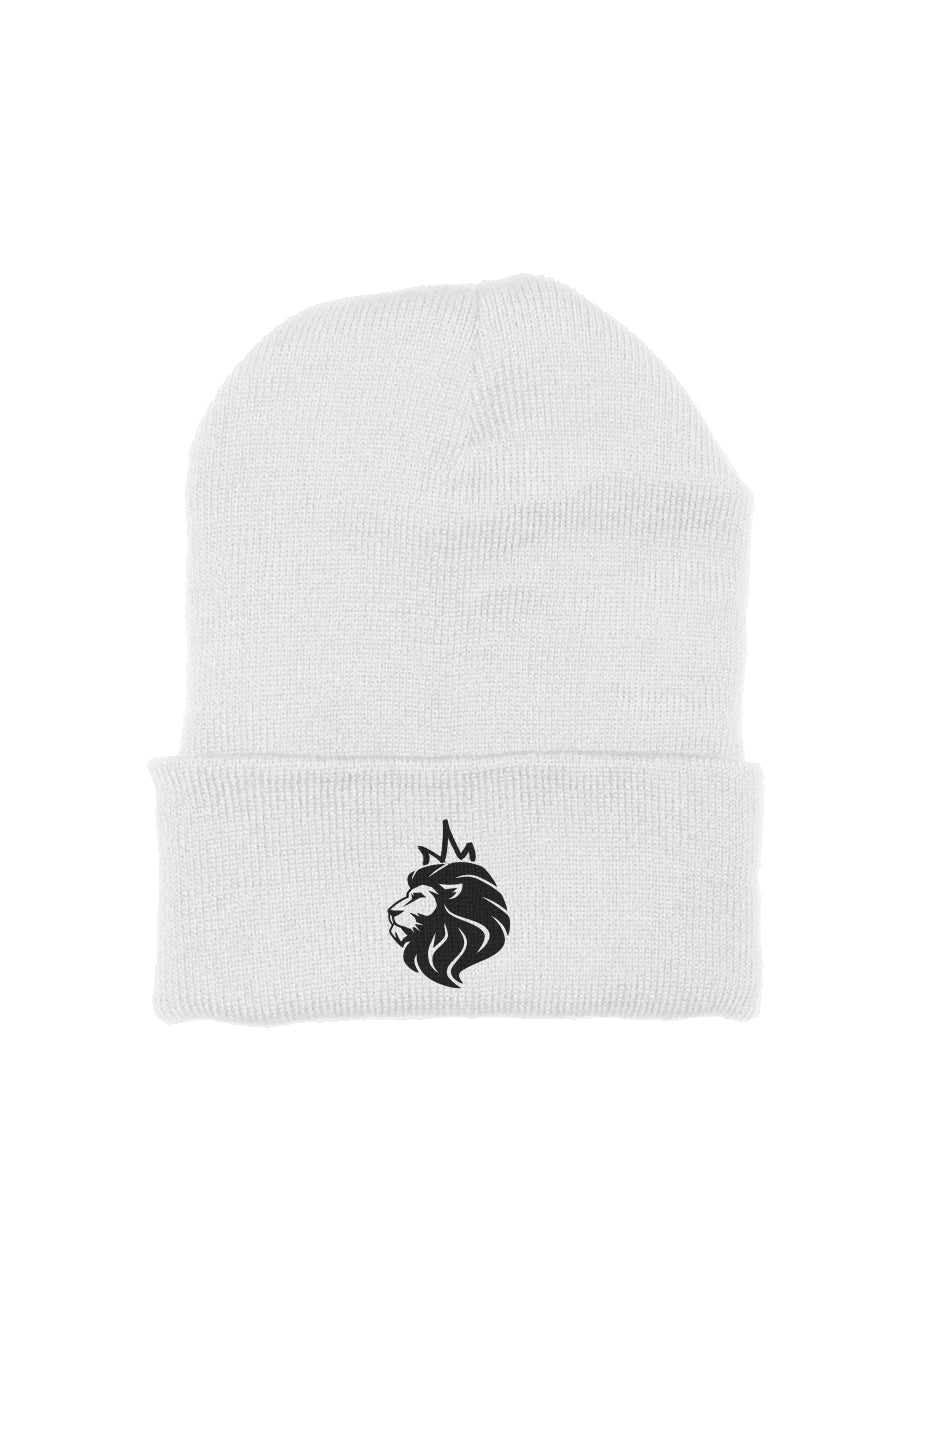 RIGHTEOUS ROYALTY EMBROIDERED PREMIUM BEANIE